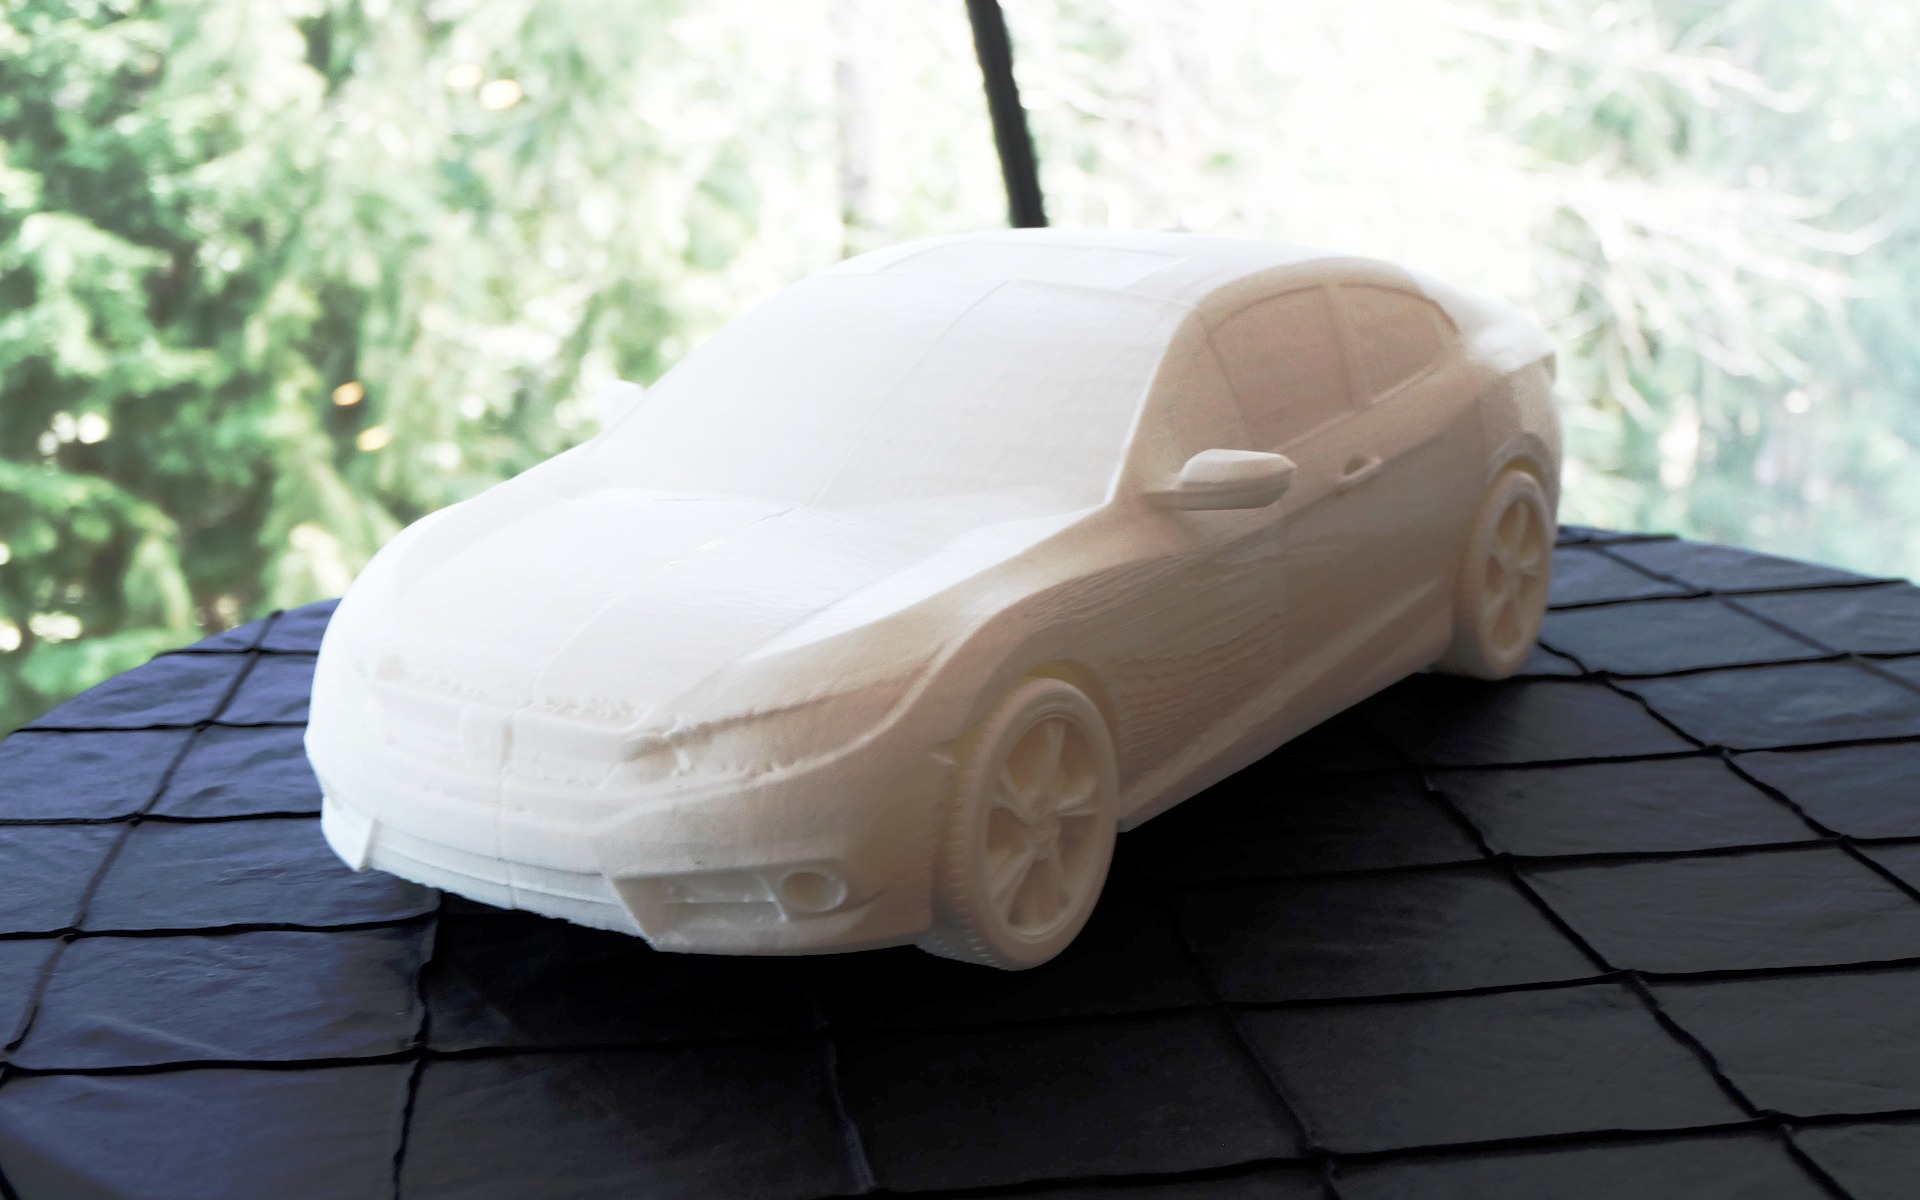 A 3D-printed scale model of the 2016 Honda Civic Coupe.